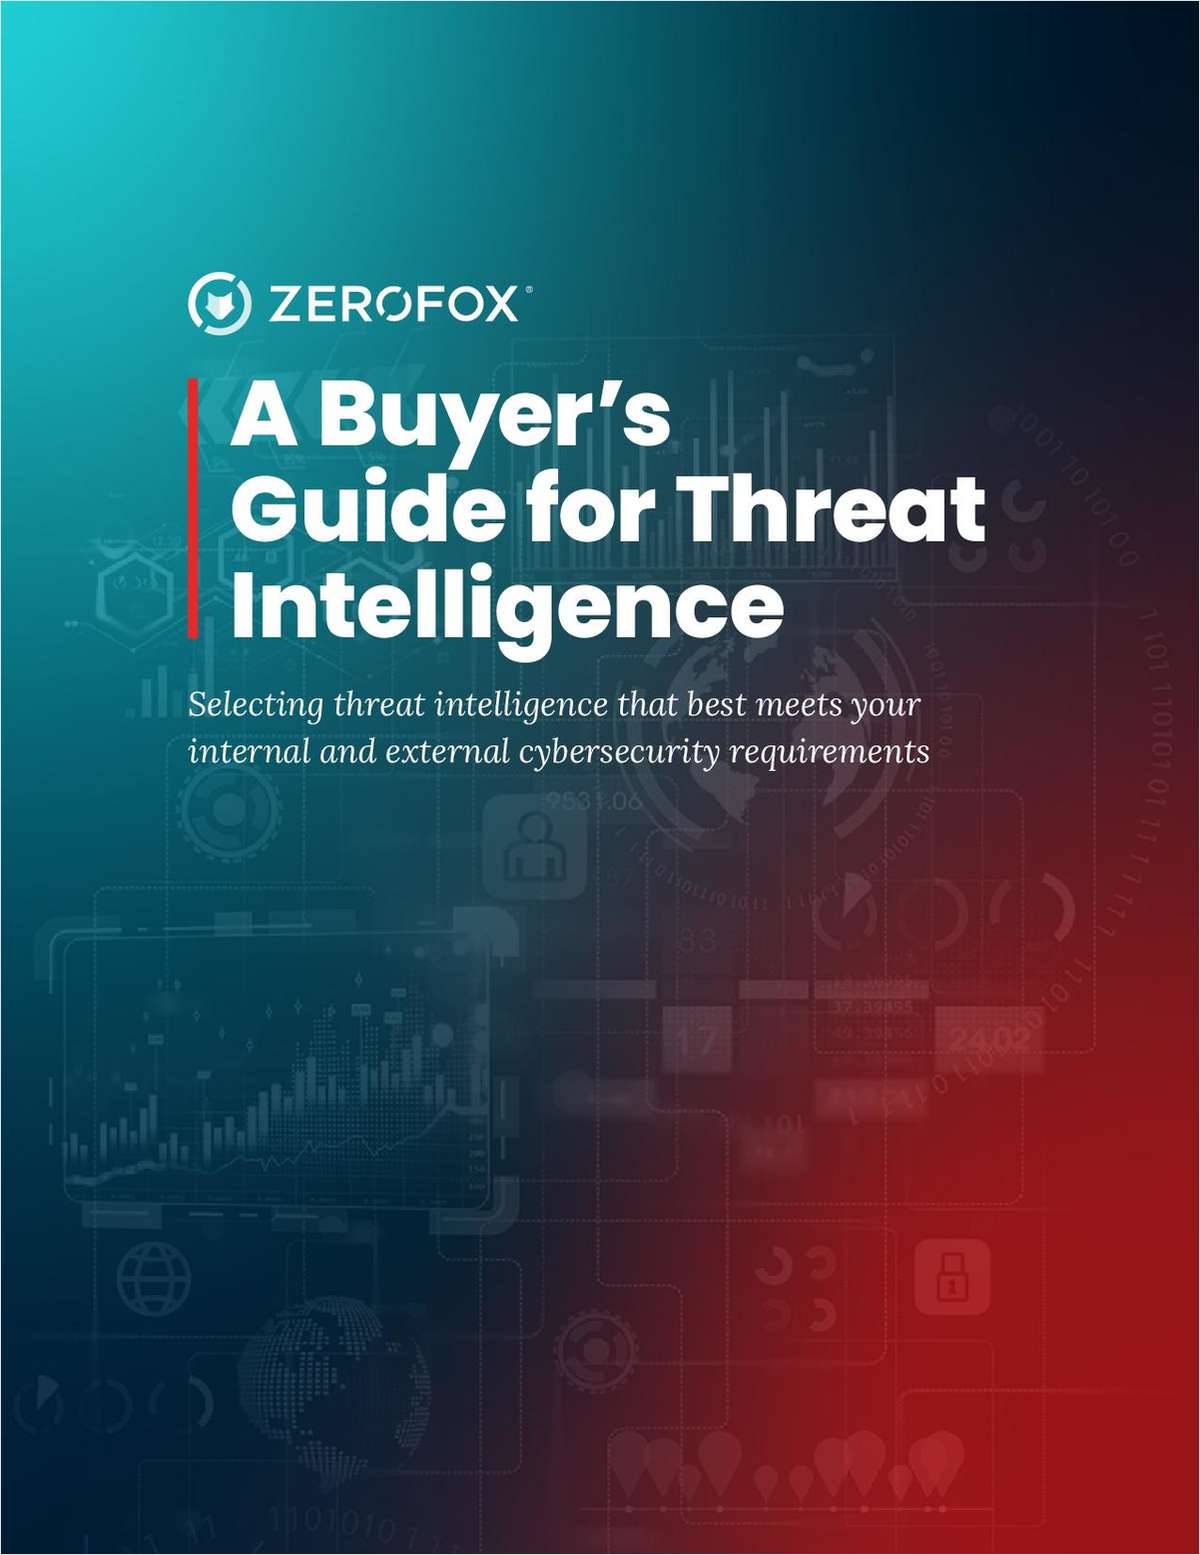 A Buyer's Guide for Threat Intelligence